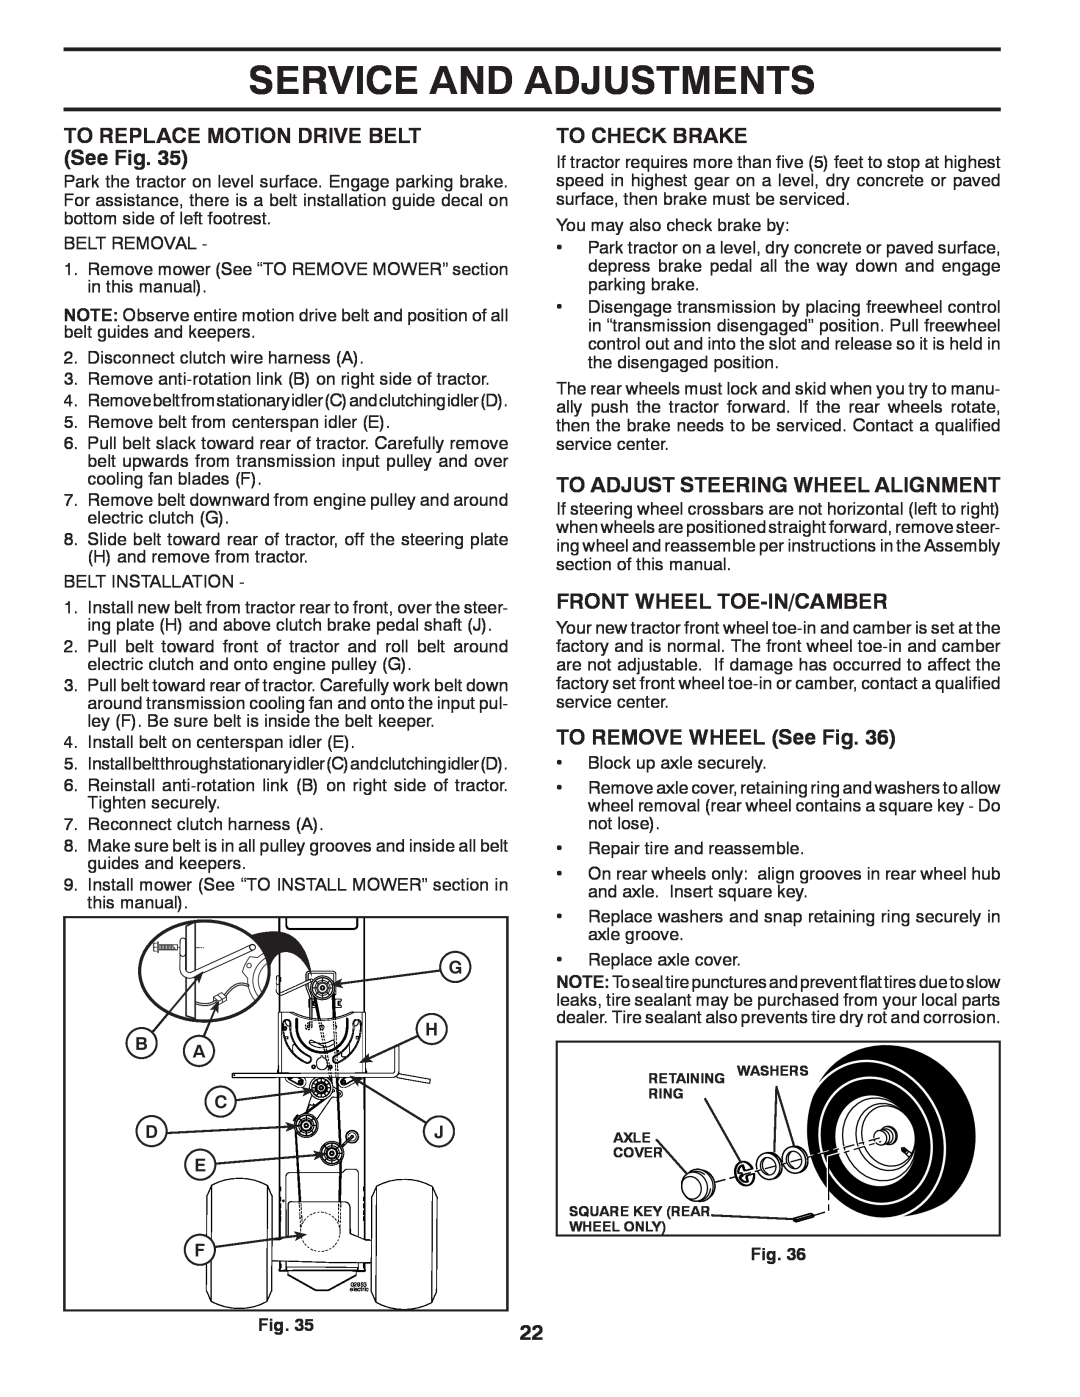 Husqvarna 96045001501 owner manual TO REPLACE MOTION DRIVE BELT See Fig, To Check Brake, To Adjust Steering Wheel Alignment 